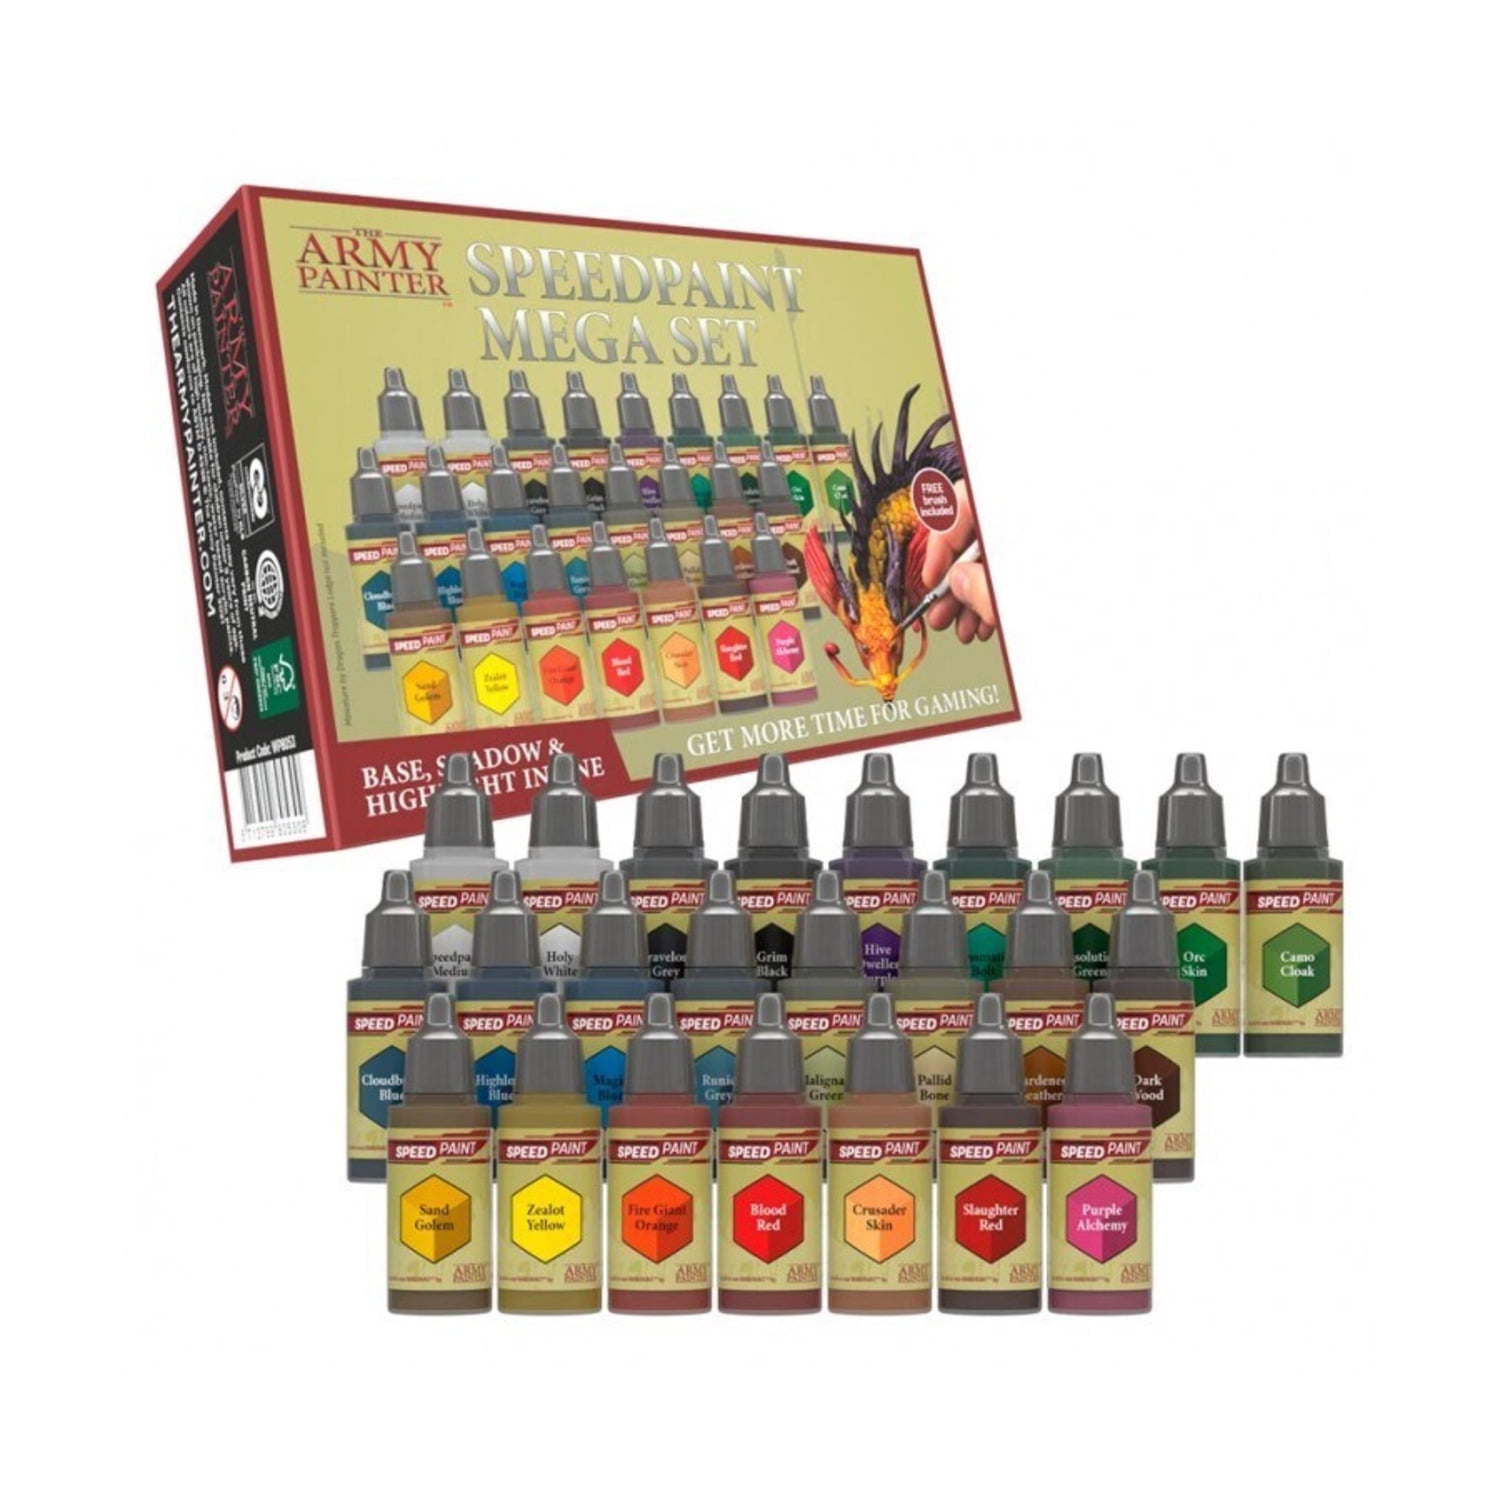 Painting Kit for Adults - 38 Piece Set Includes 24 Acrylic Paints, 3 Canvas, 6 Brushes, Wood Palette, Color Wheel, Spatula - Art Supplies for